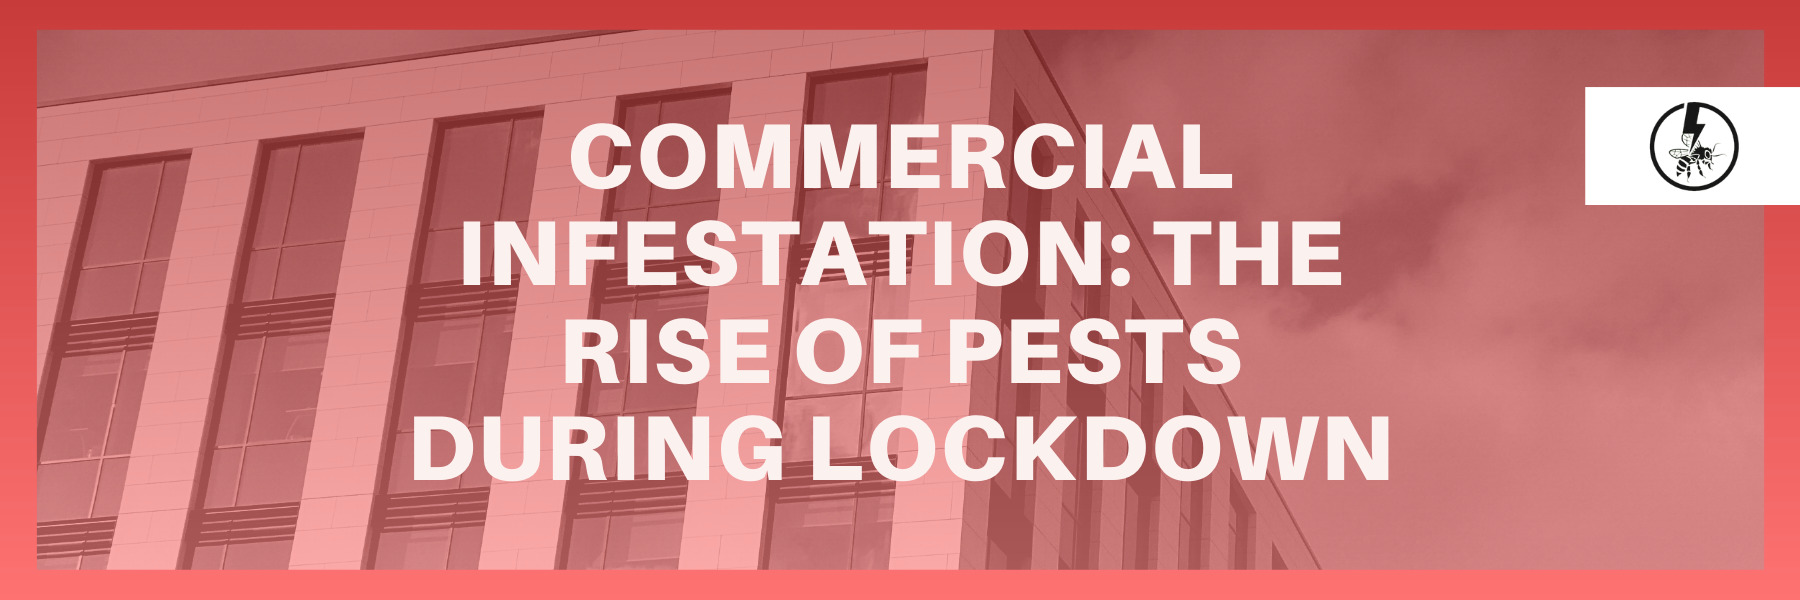 Commercial Infestation: The Rise of Pests During Lockdown